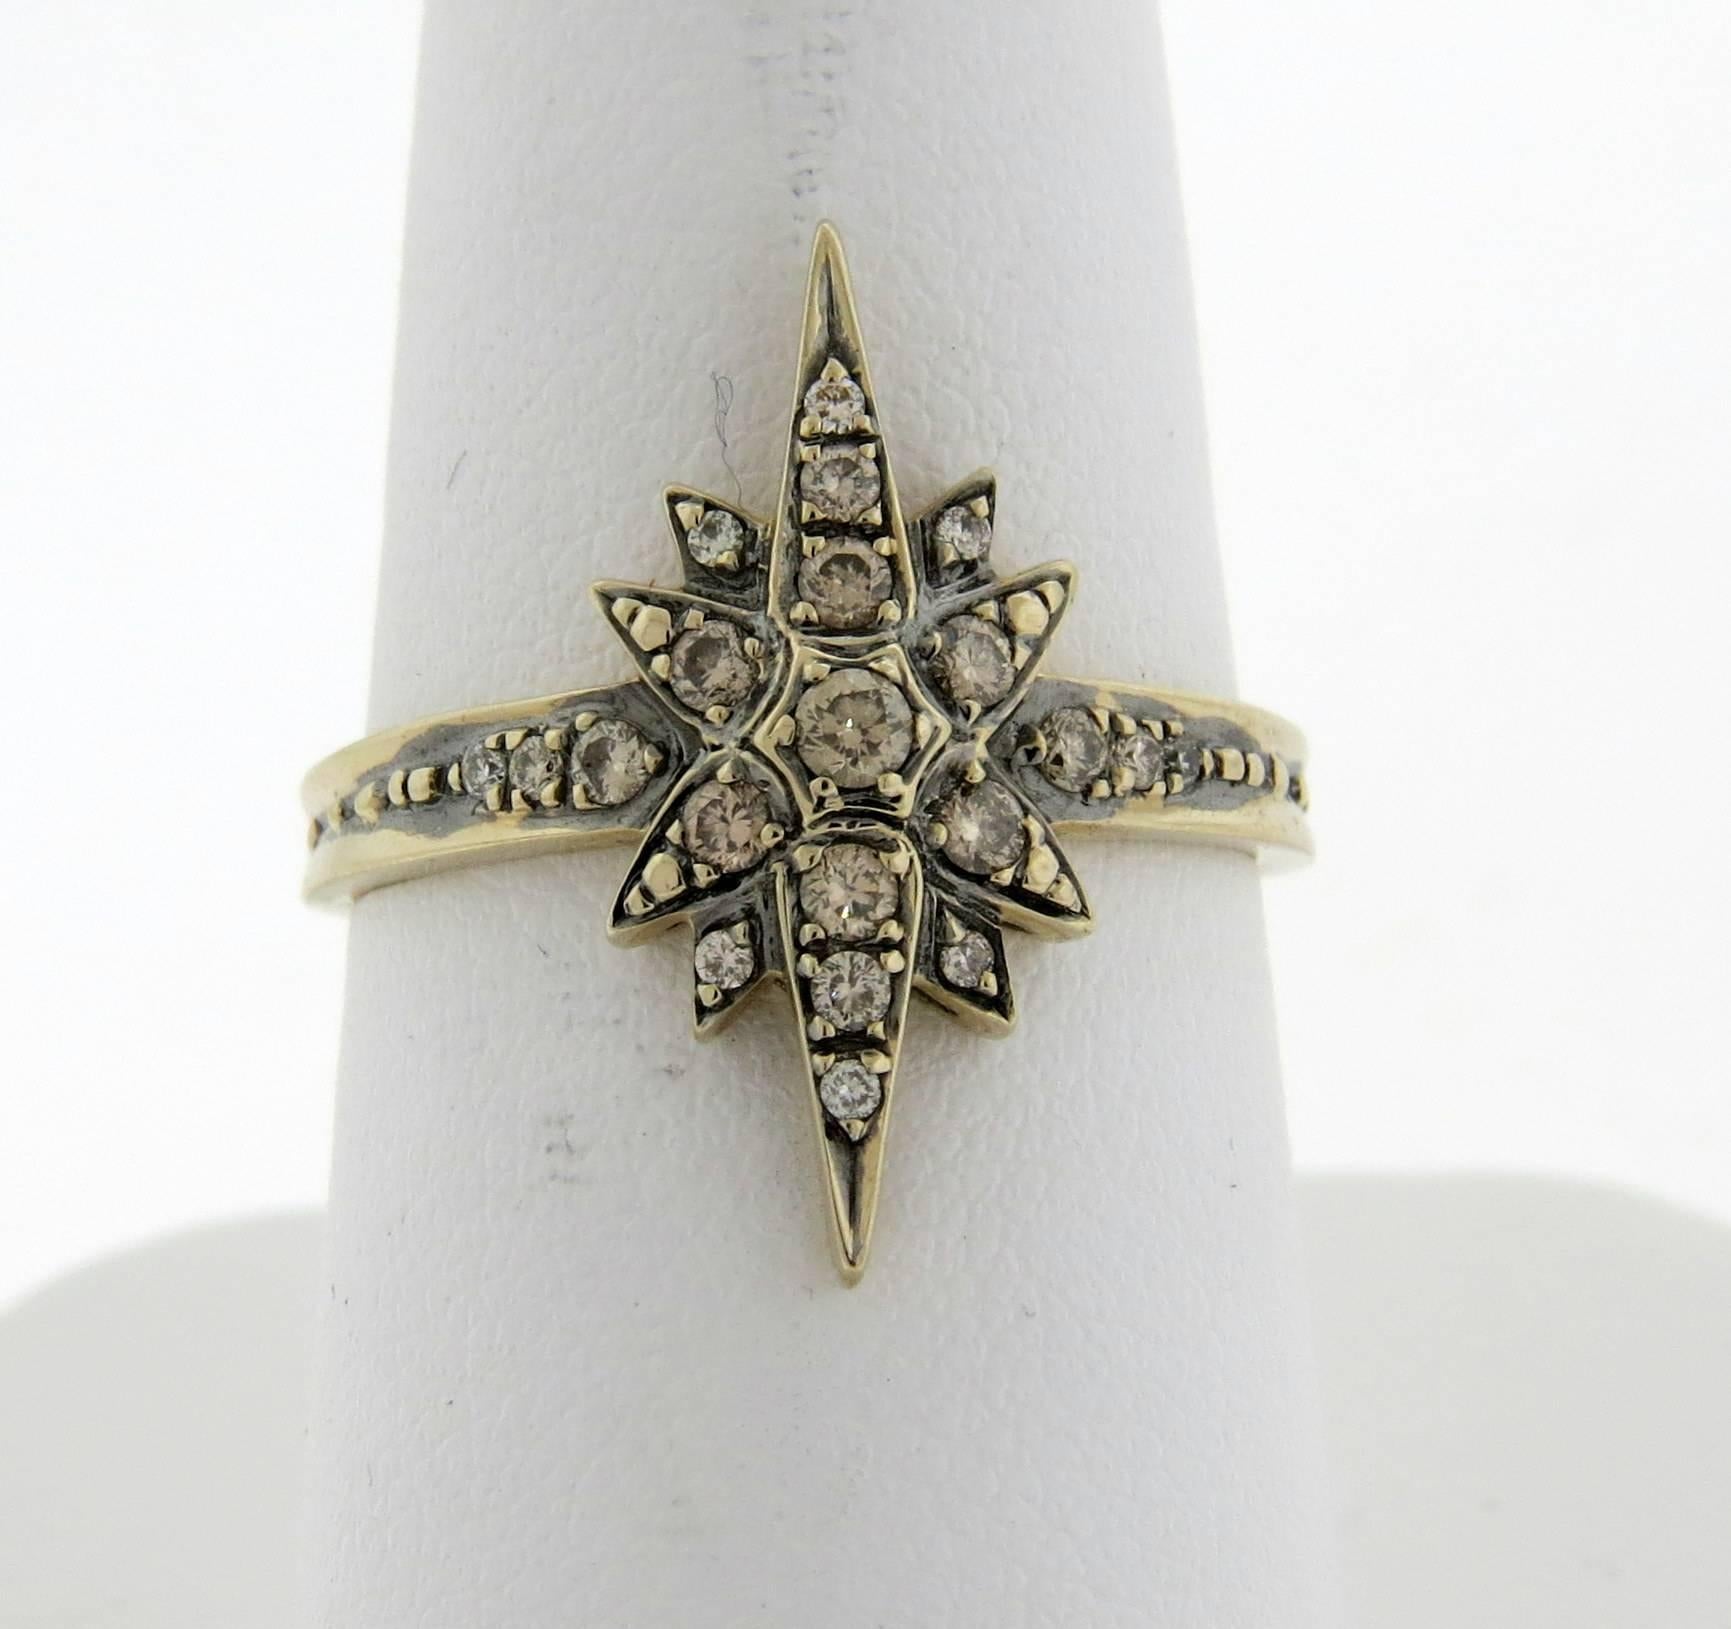 An 18k gold star ring, crafted by H. Stern for Stars collection, set with approx. 0.40ctw in fancy brown diamonds. Ring size 7 1/2, ring top is 21mm x 10mm . Marked;  750, S mark, signature Star . Weight - 3.8 grams